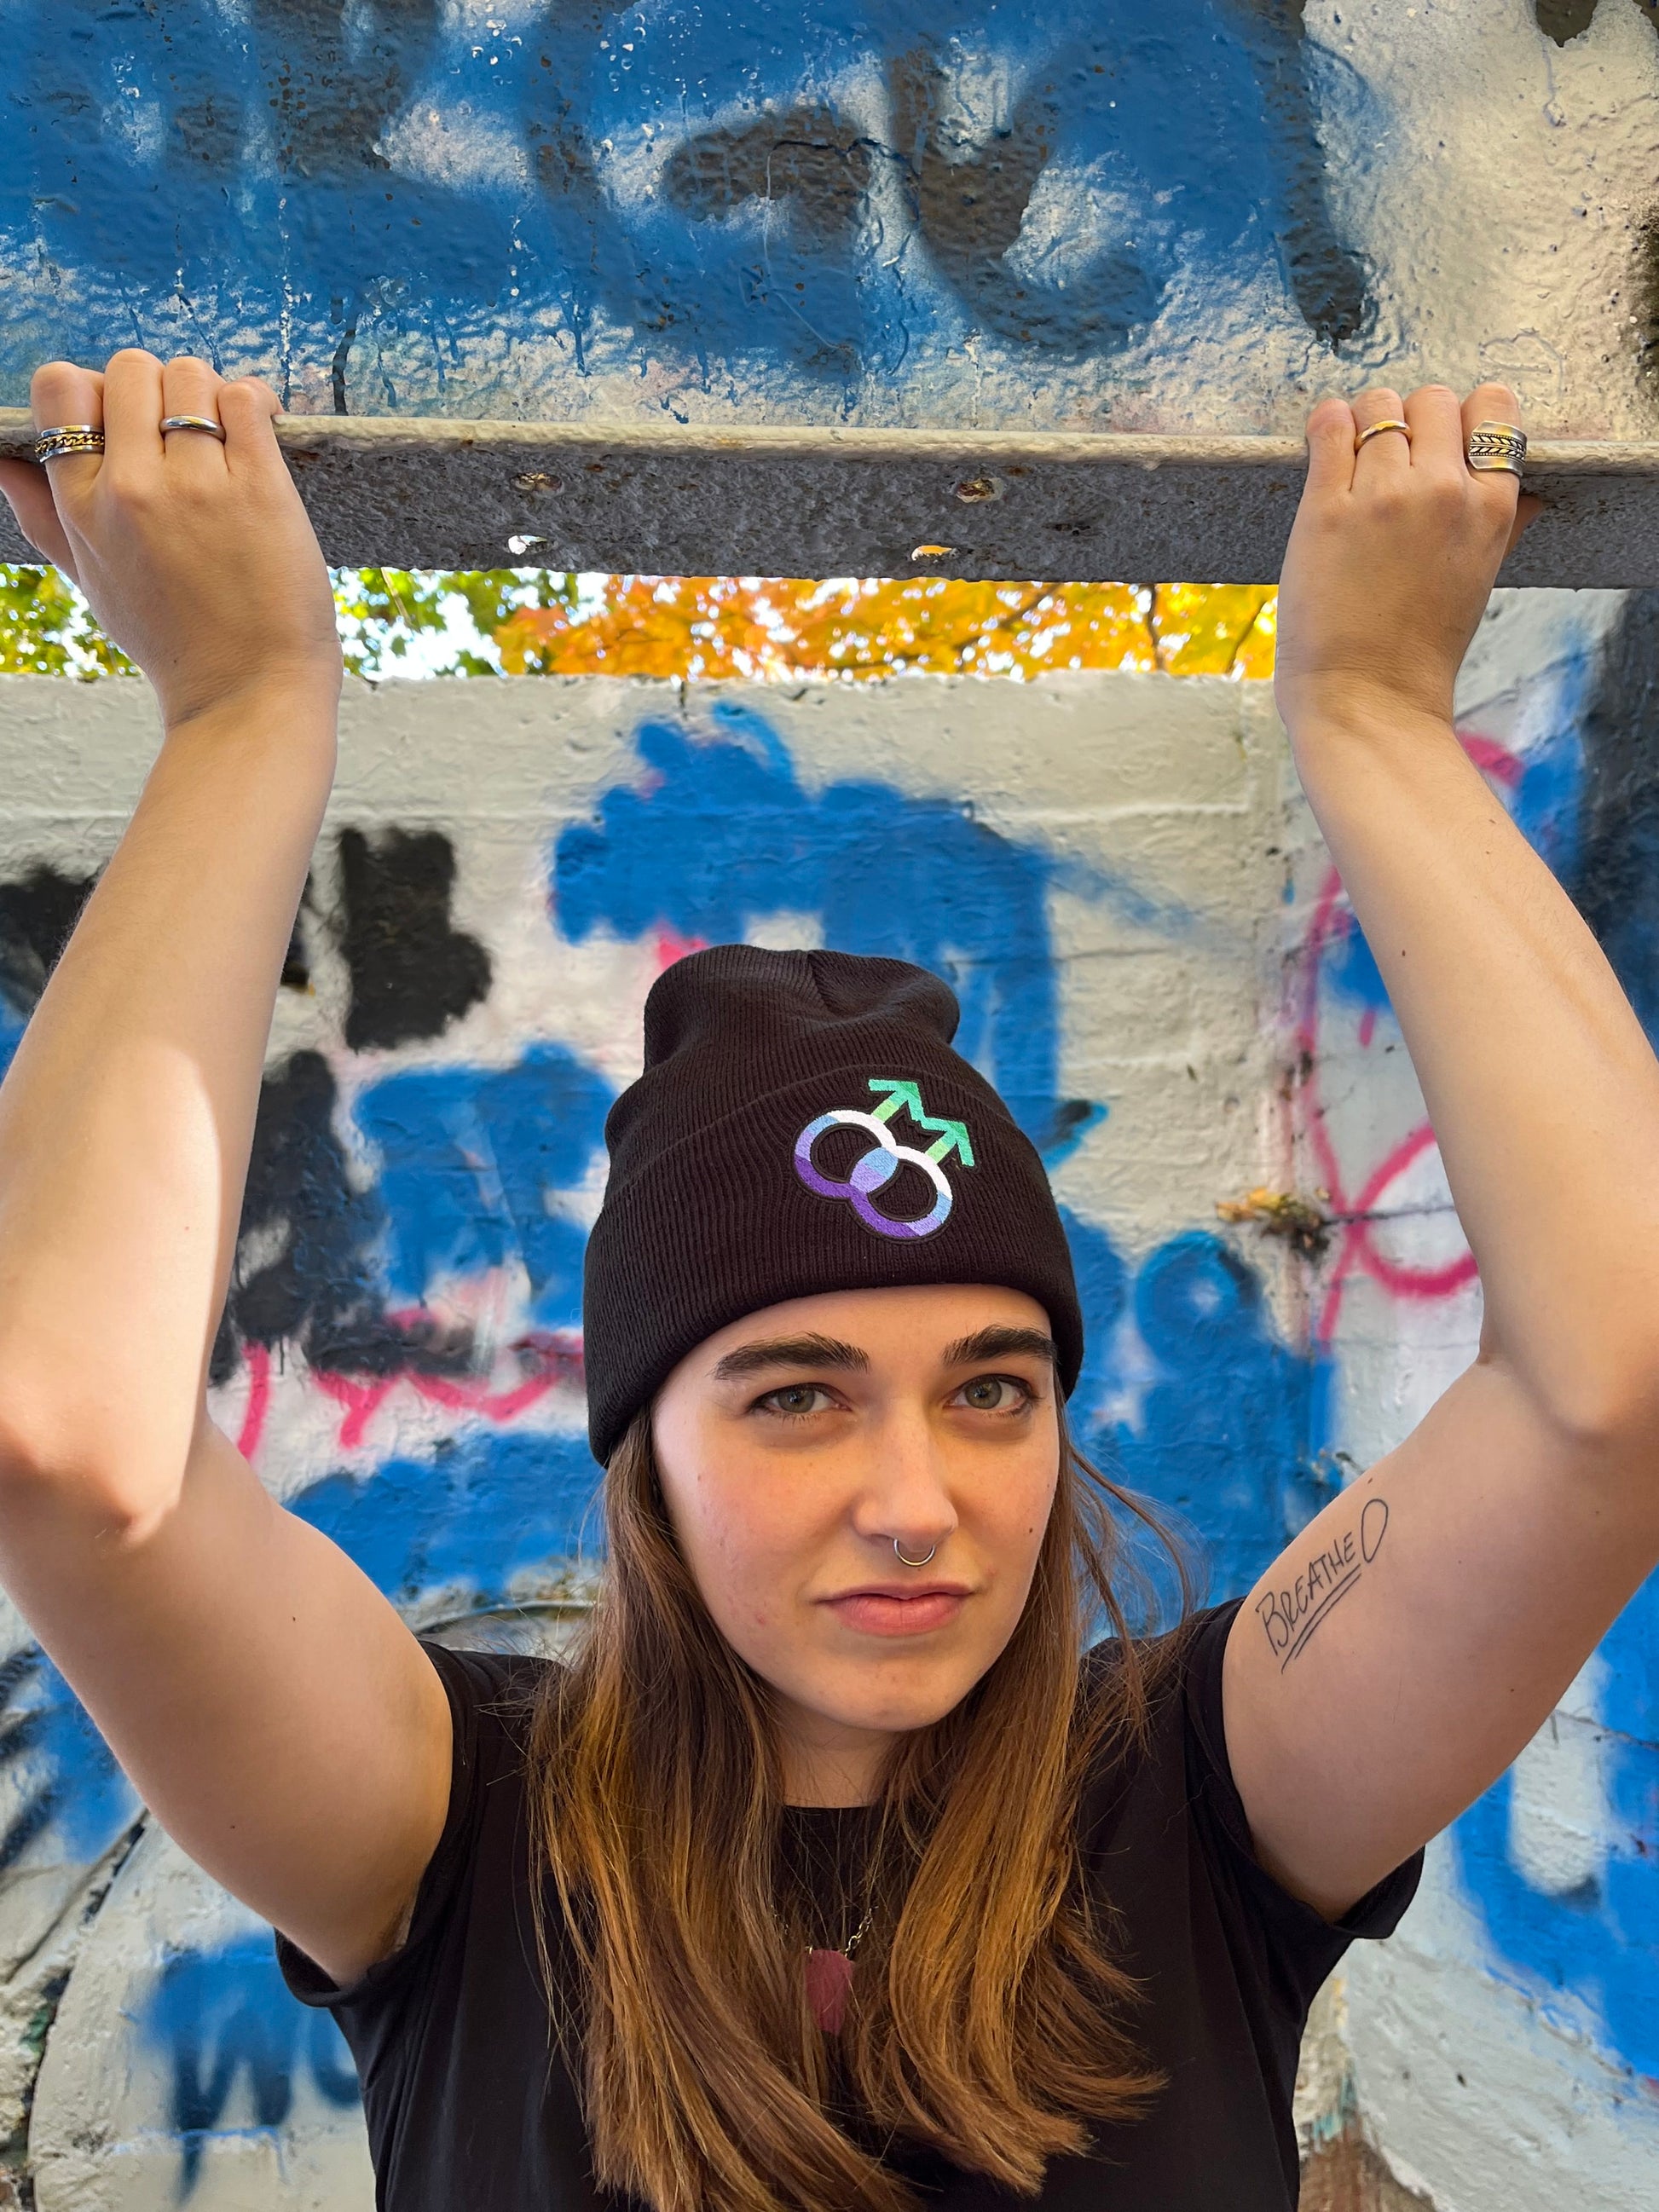 chest up shot of person with arms above head gripping an I-beam. They are wearing the black gay mlm symbol beanie